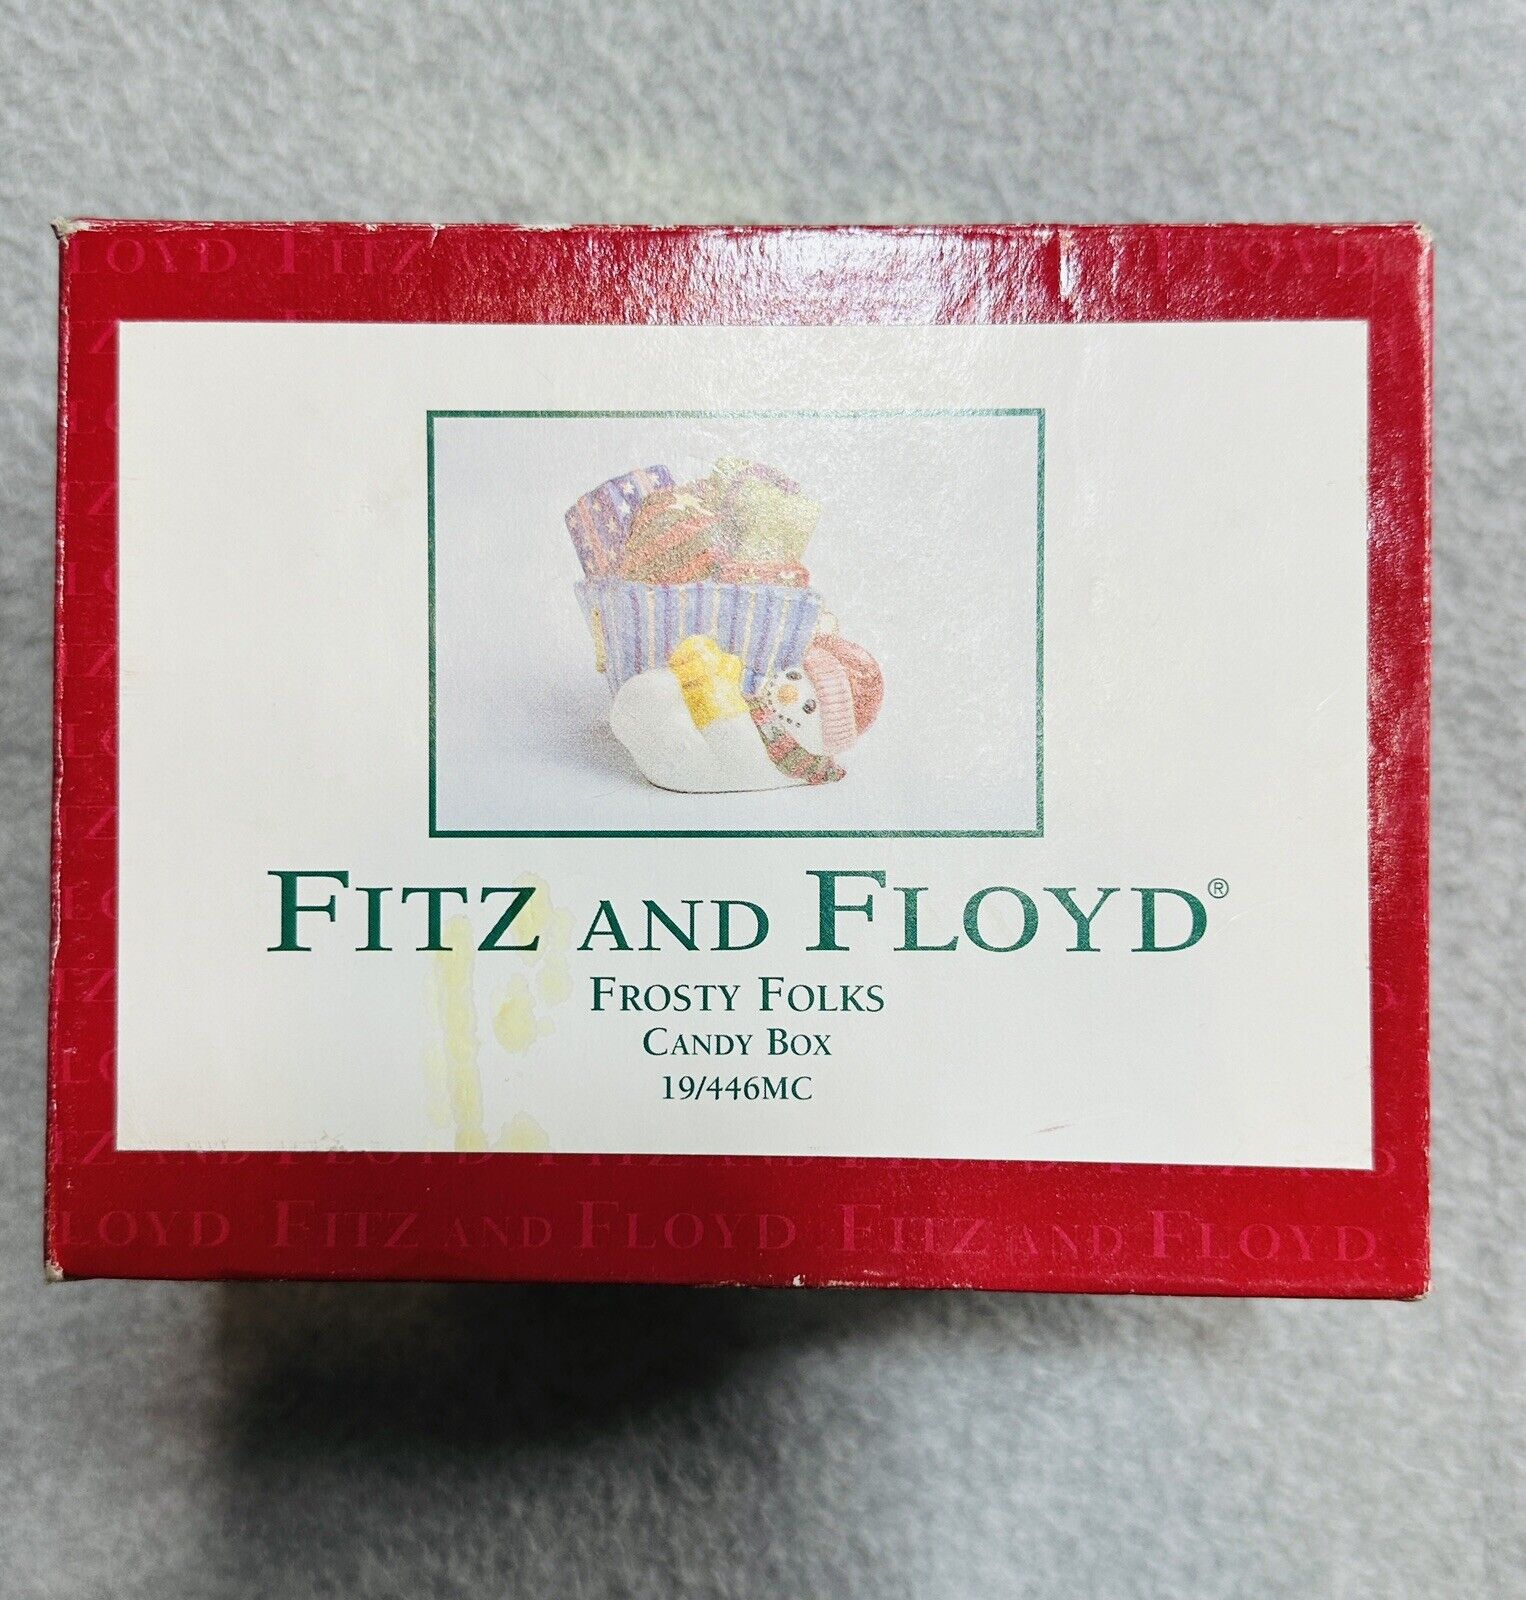 VINTAGE Fitz And Floyd Frosty Folks Candy Box 19/446MC 90s Y2K With Box